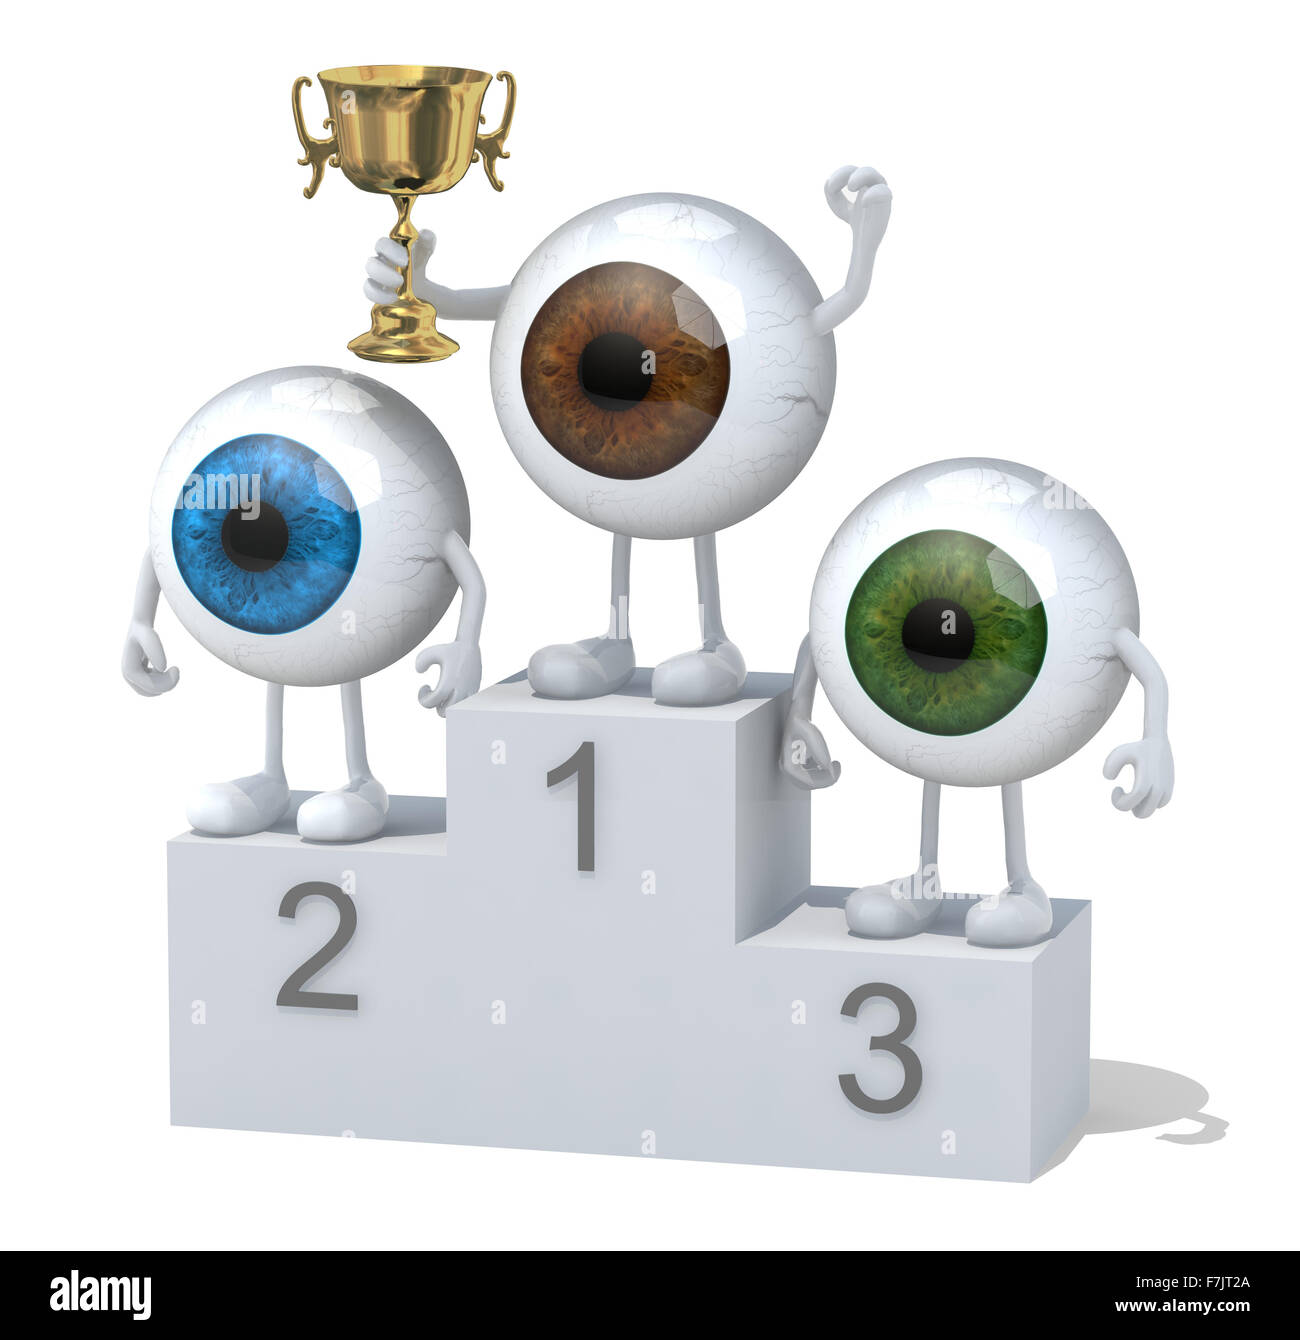 eyeballs with arms, legs and winner cup on sports victory podium Stock Photo